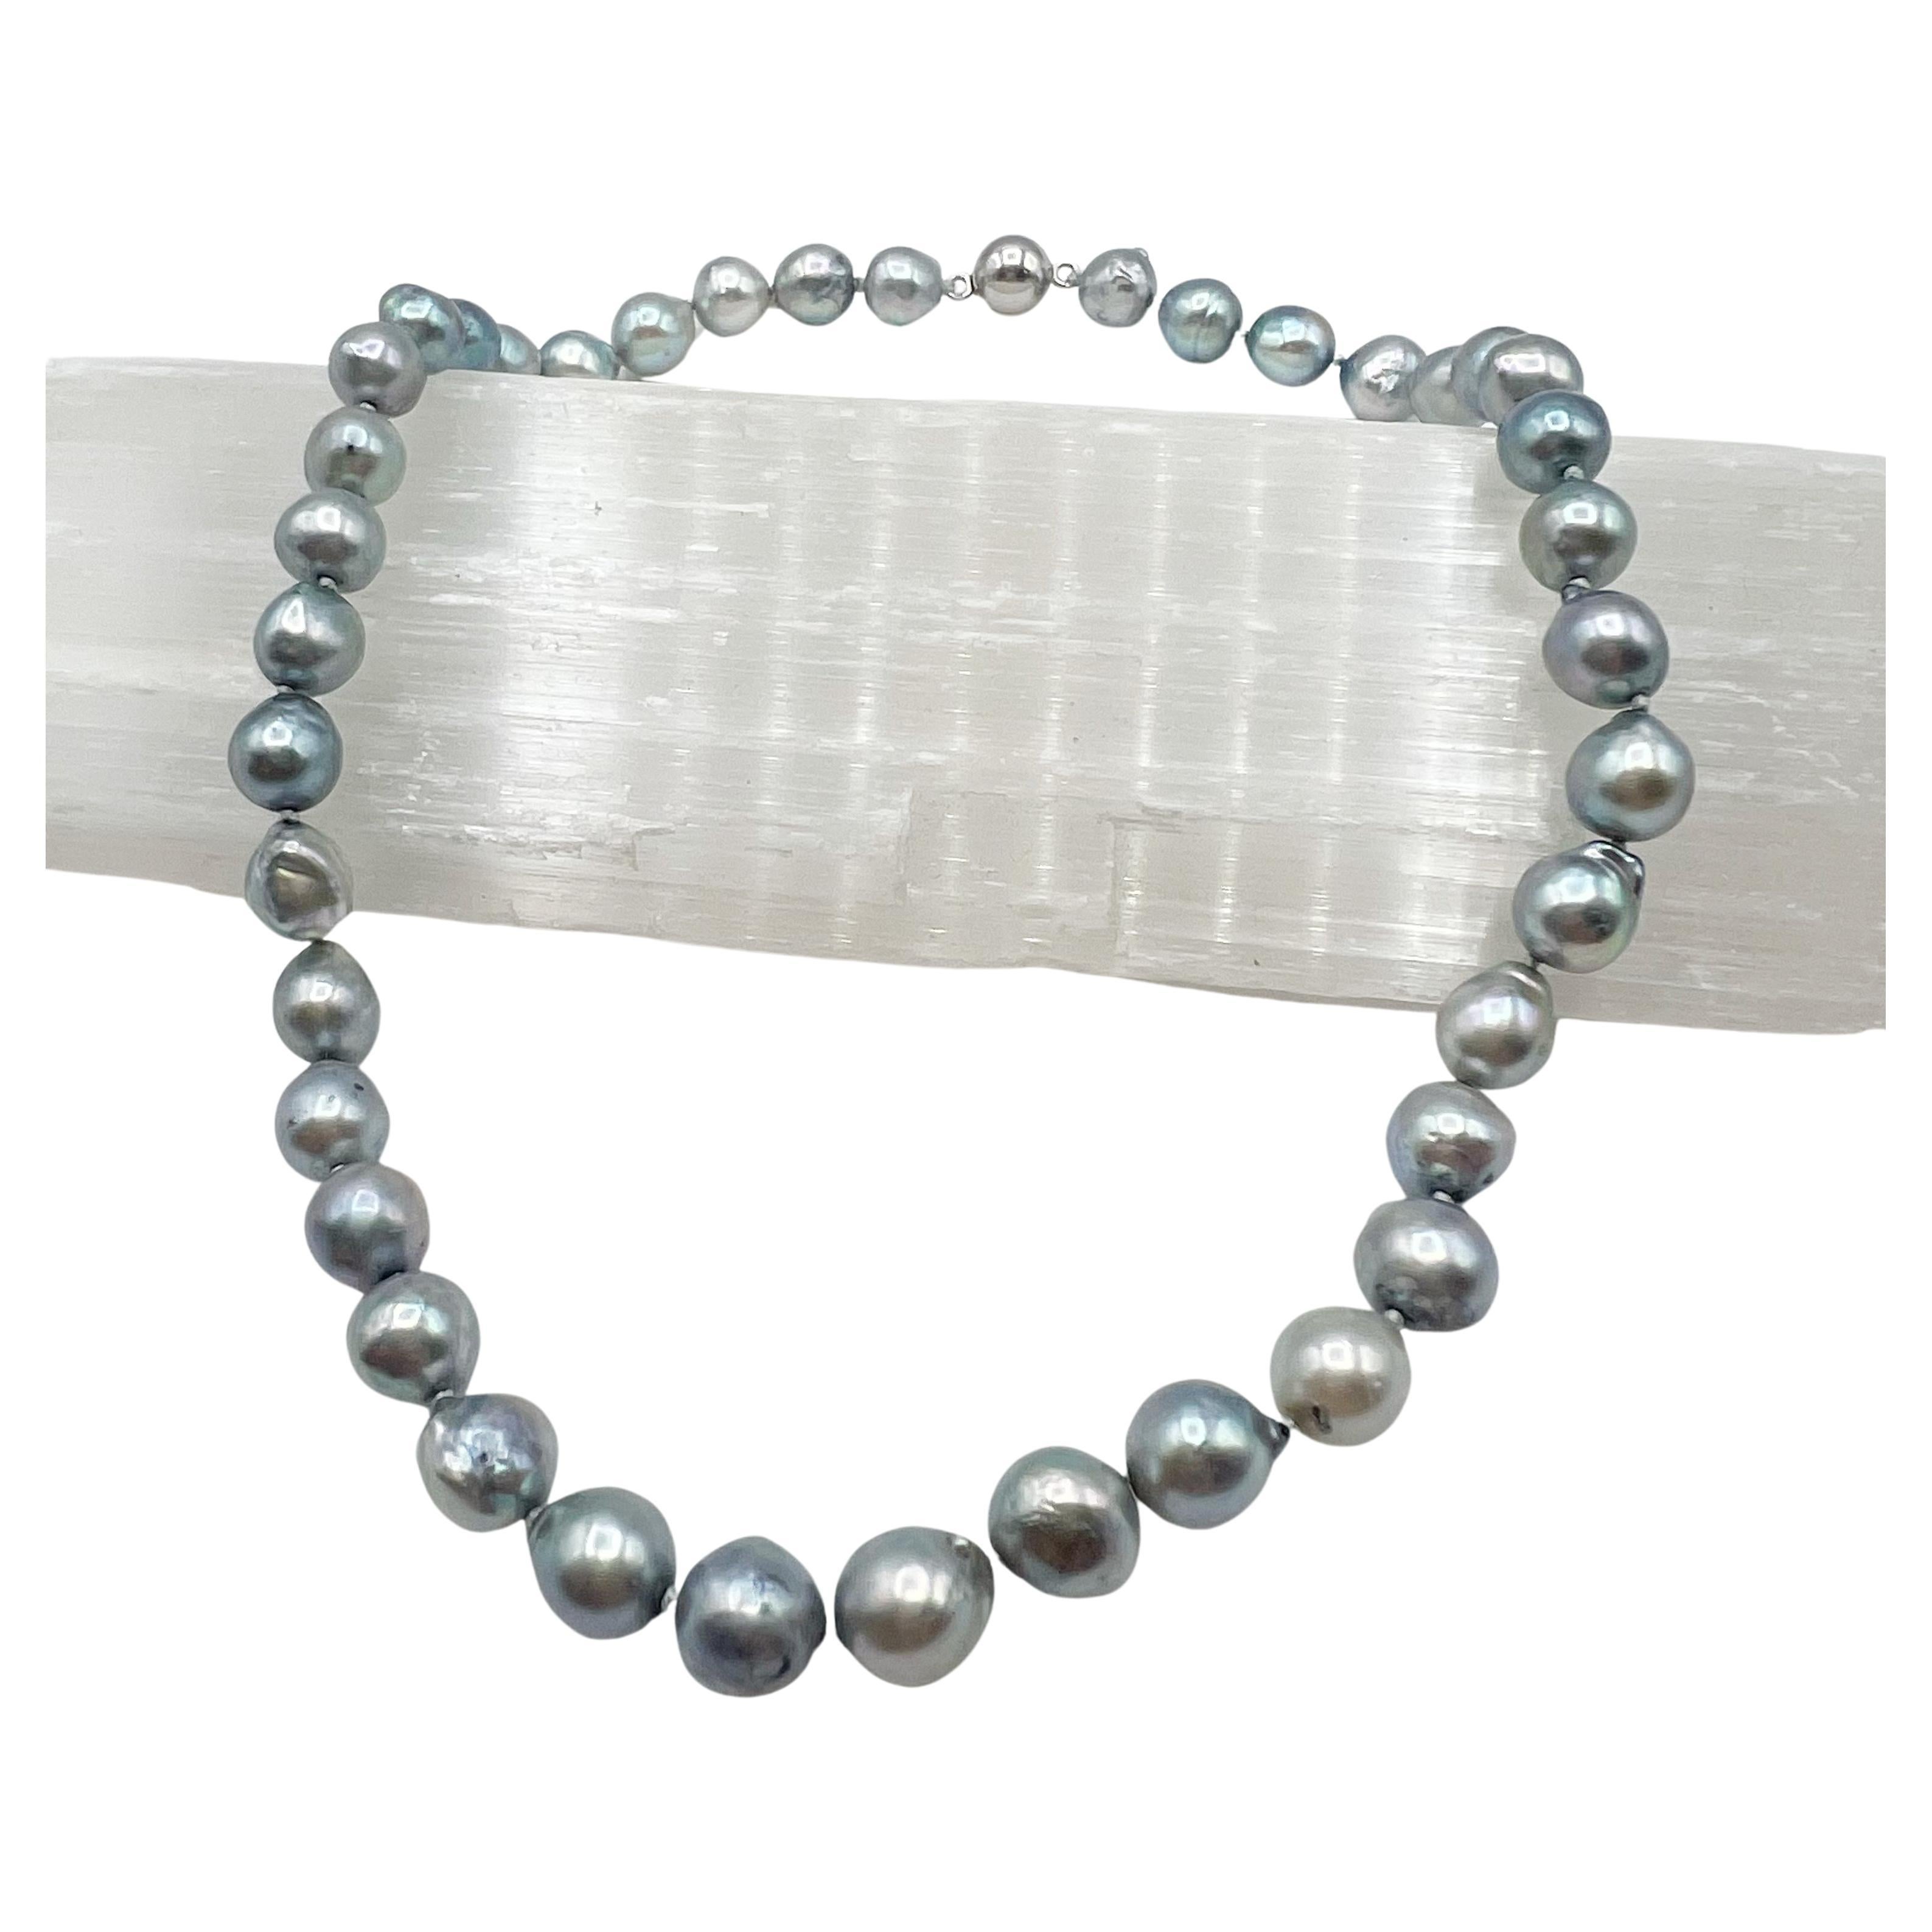 Blue Saltwater Pearl Necklace with 14 Karat White Gold Clasp For Sale